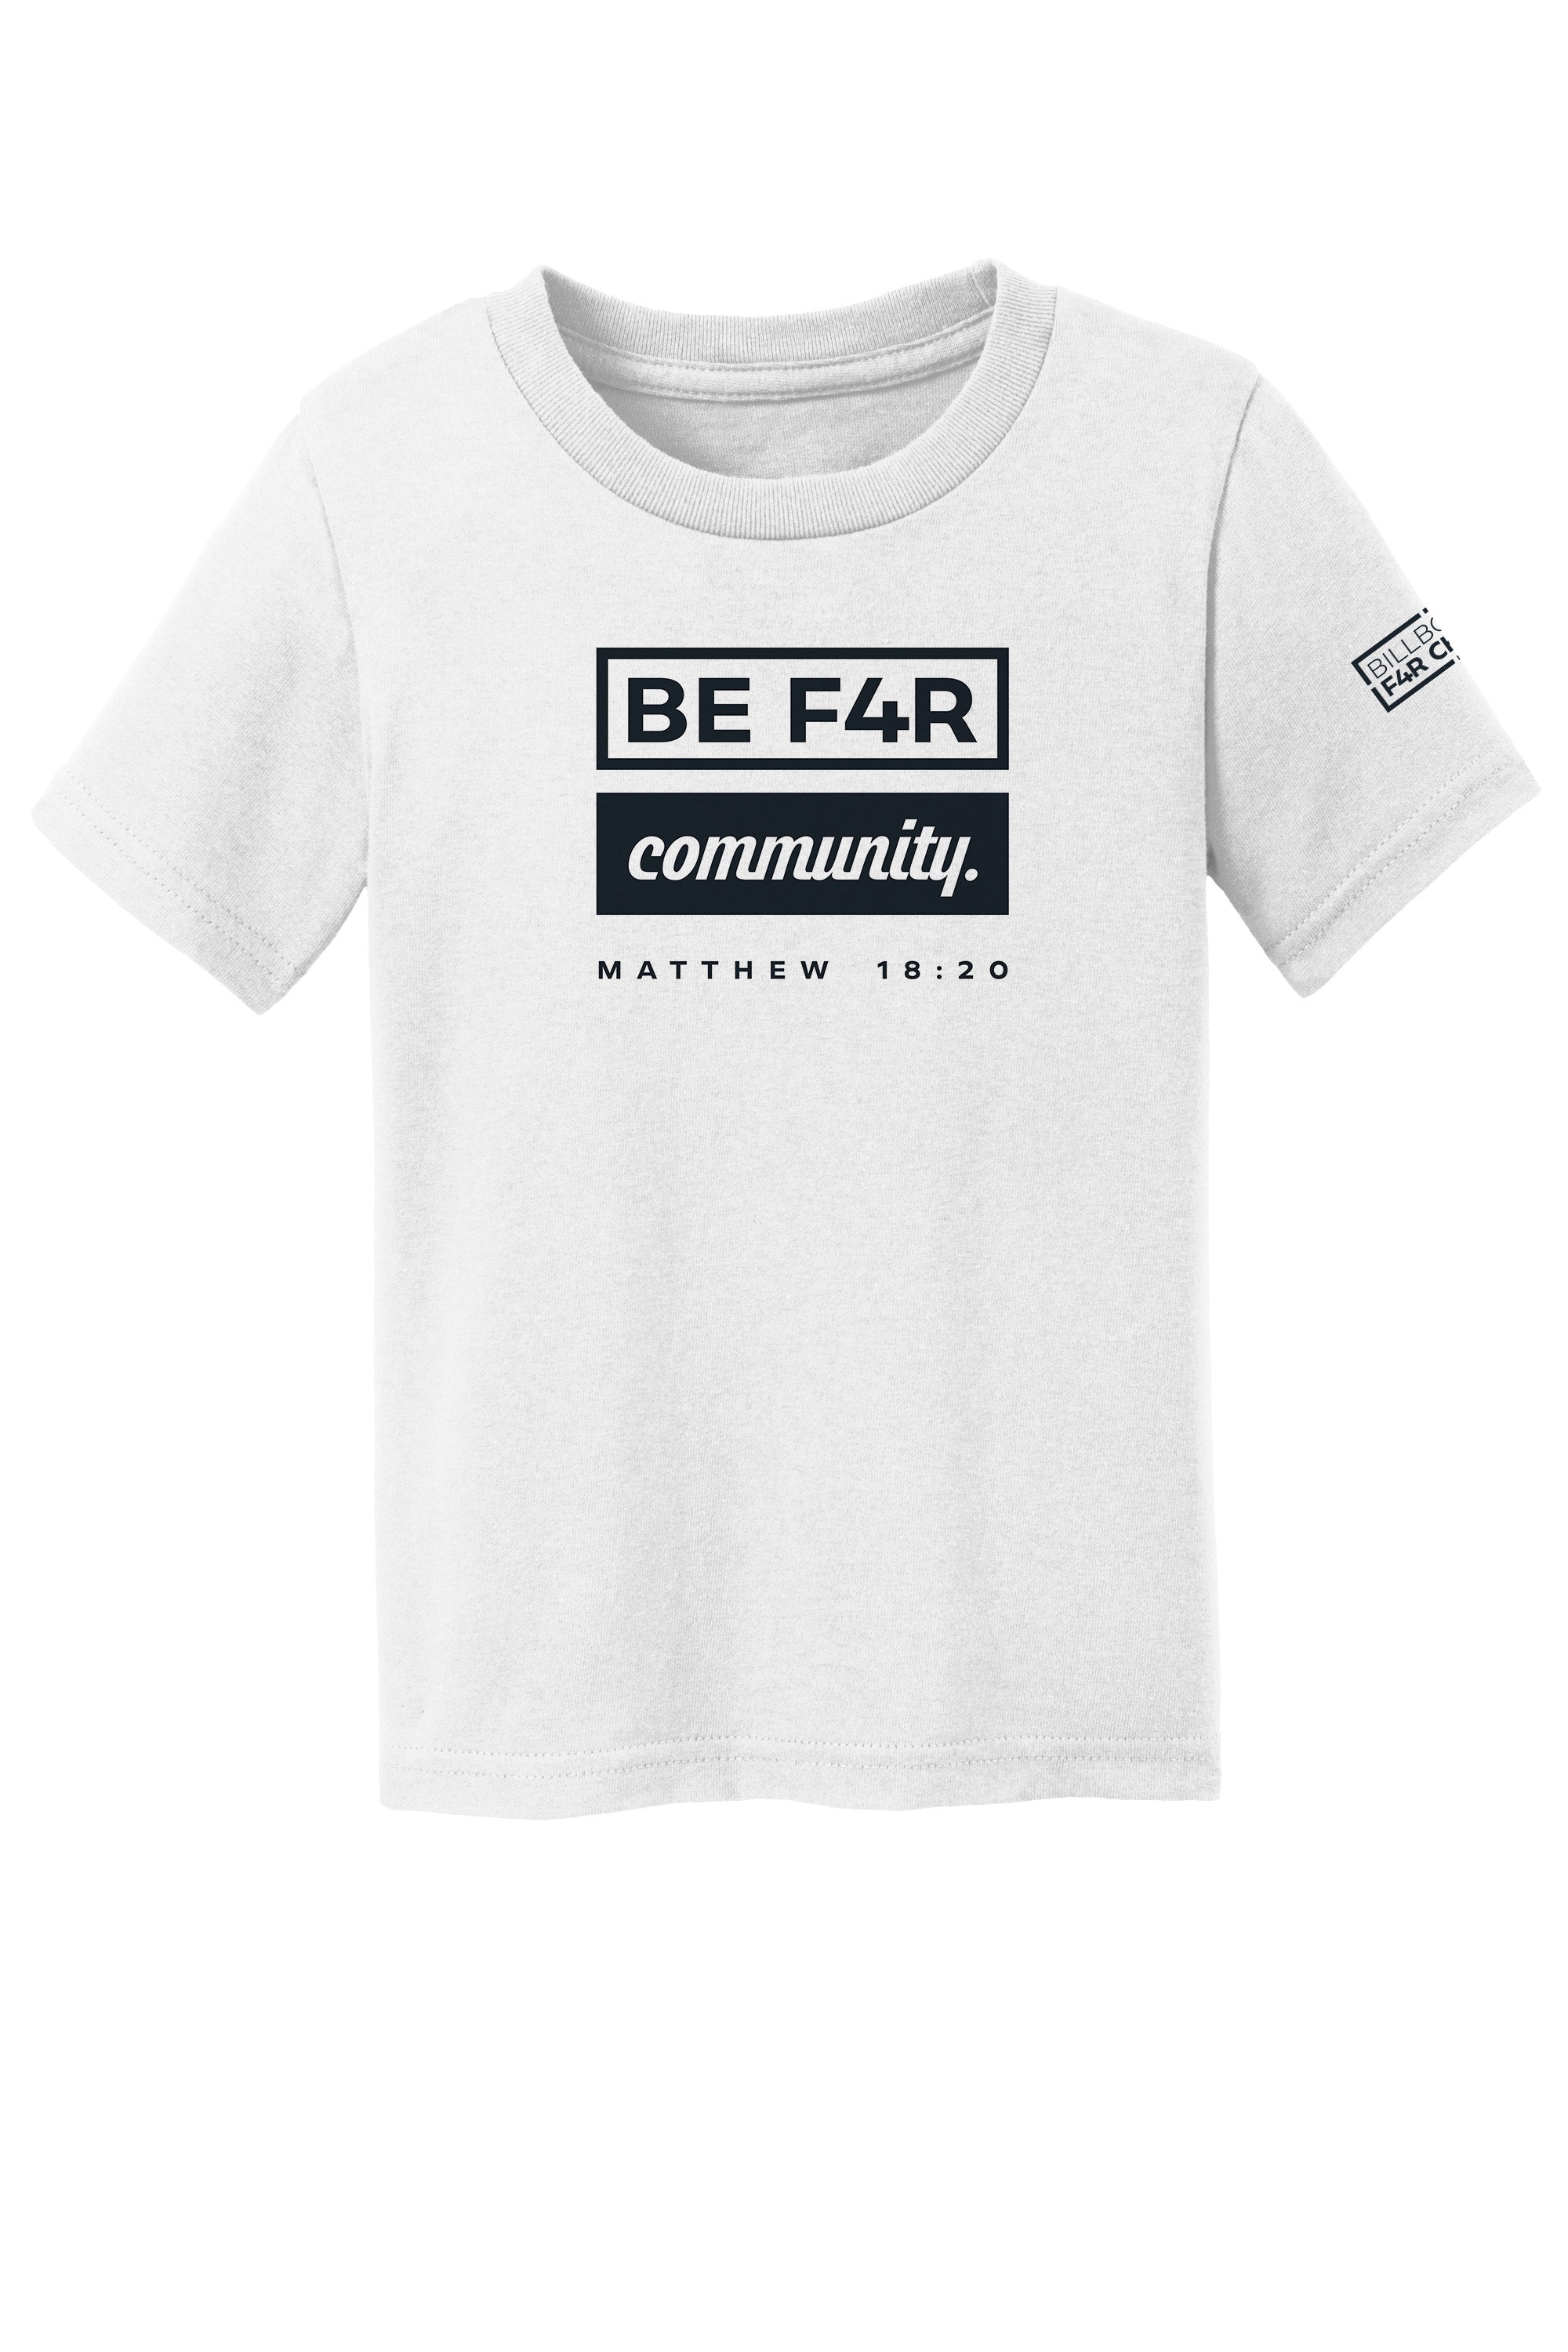 BE F4R Community 2 Toddler T-Shirt